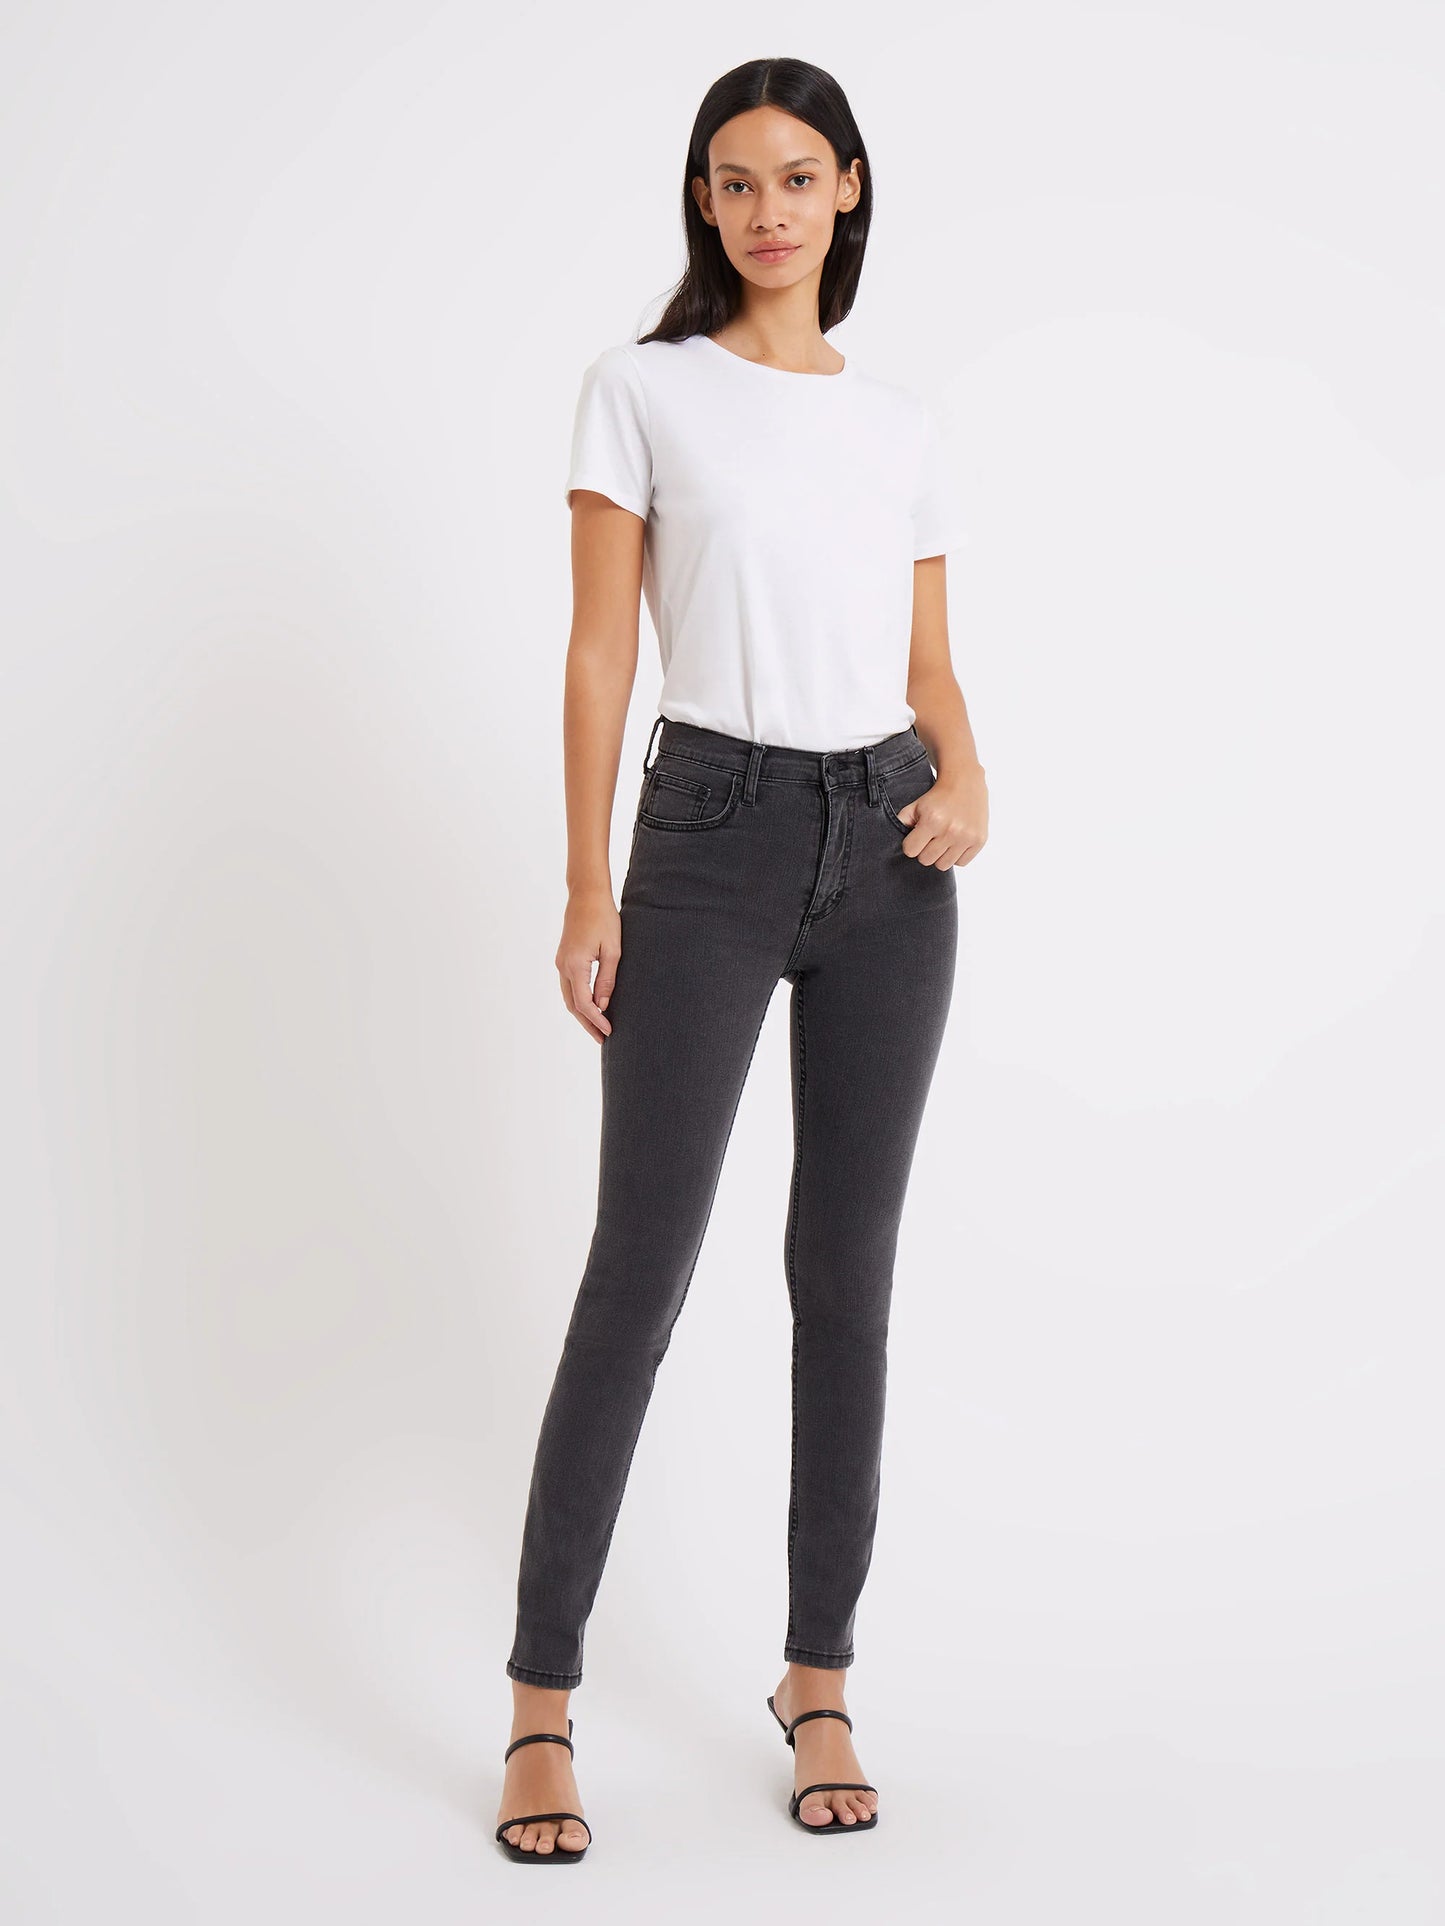 French Connection Rebound Skinny Charcoal Jeans